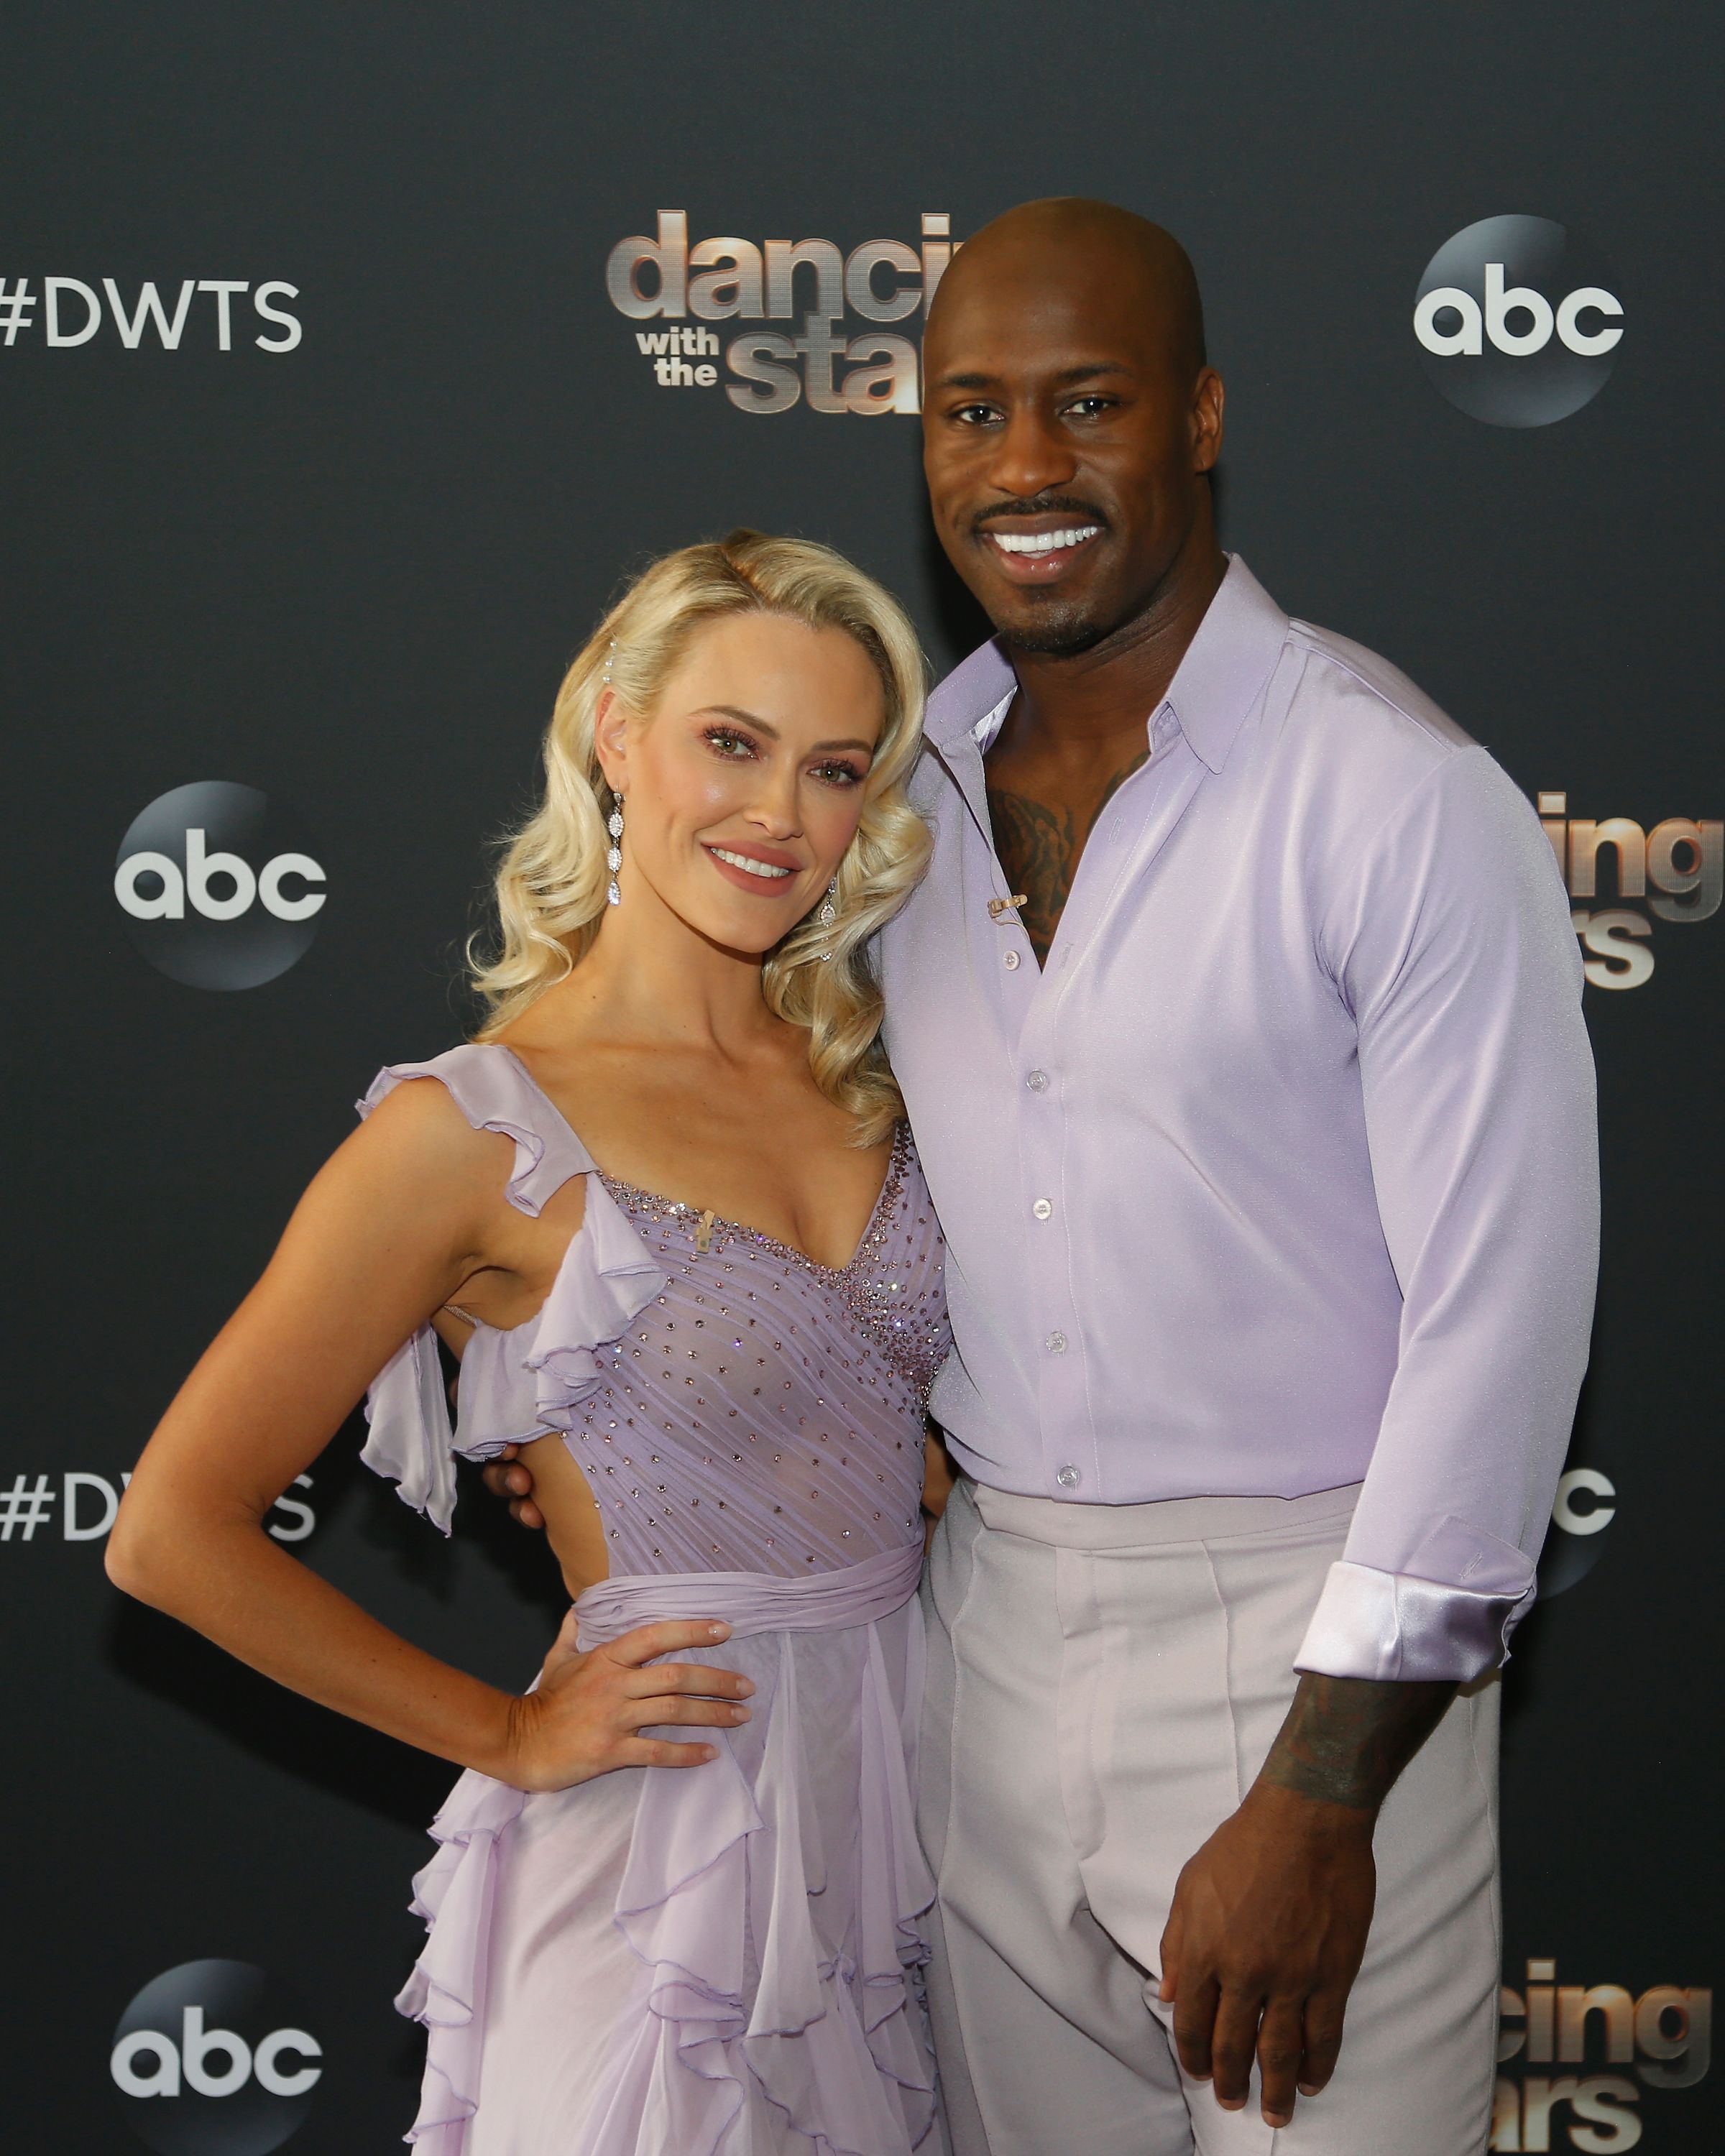 Vernon Davis and Peta Murgatroyd on the season 29 premiere of "Dancing with the Stars" on September 14, 2020 | Photo: Kelsey McNeal/ABC/Getty Images